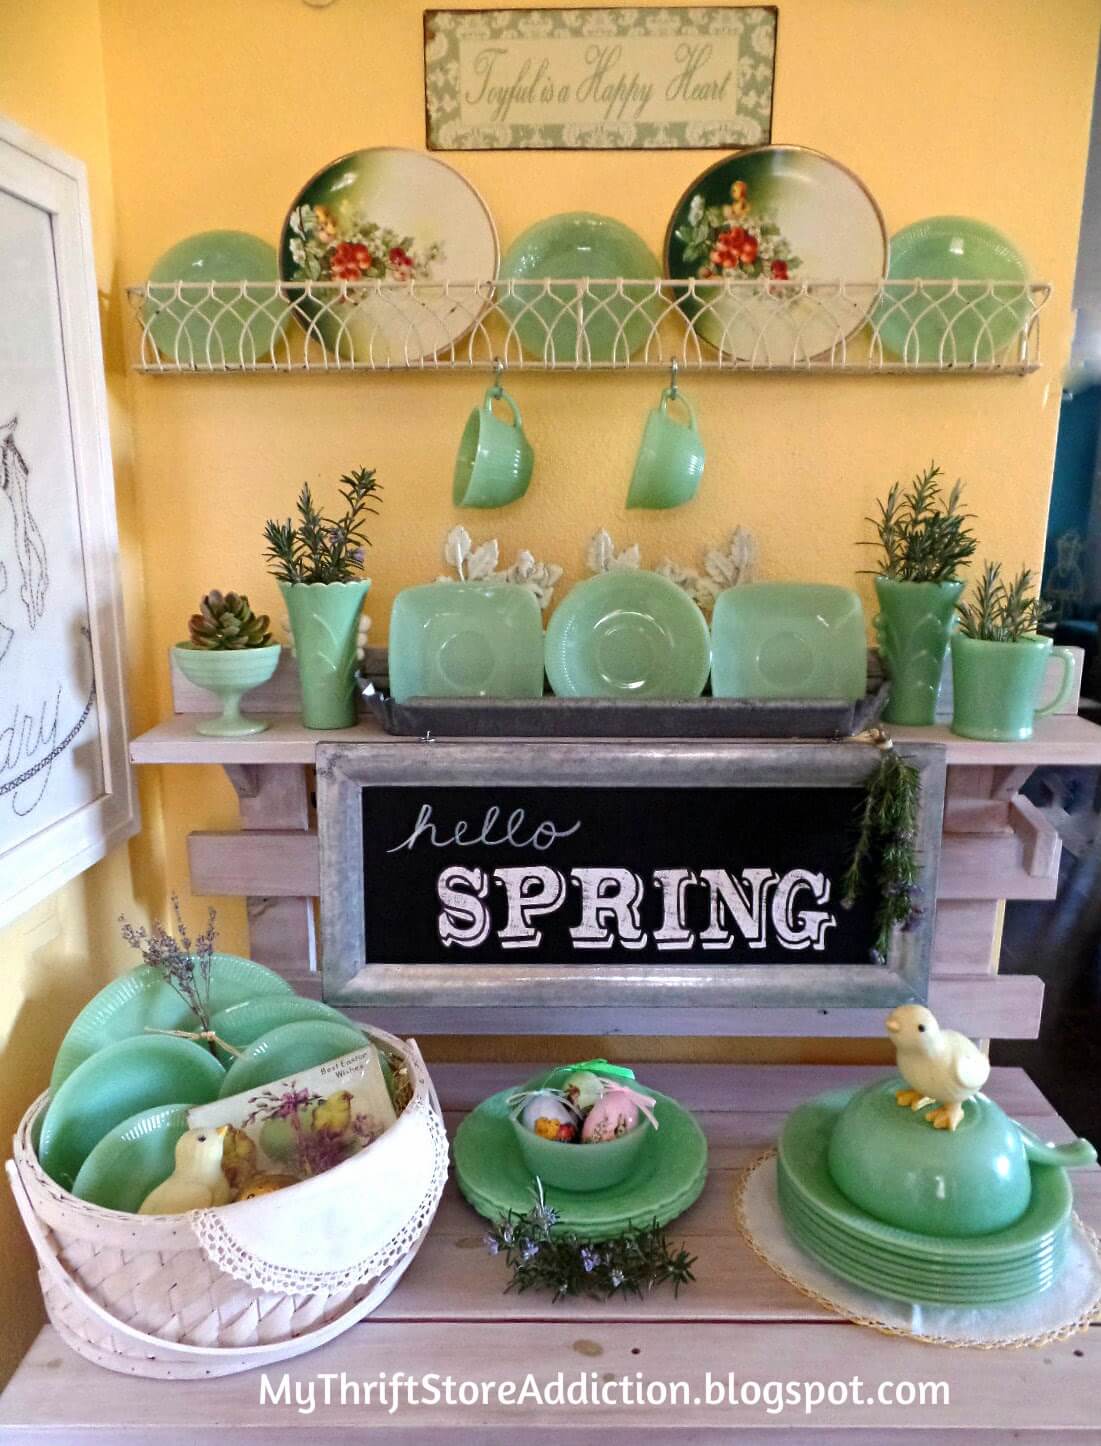 A Green Display to Welcome Spring